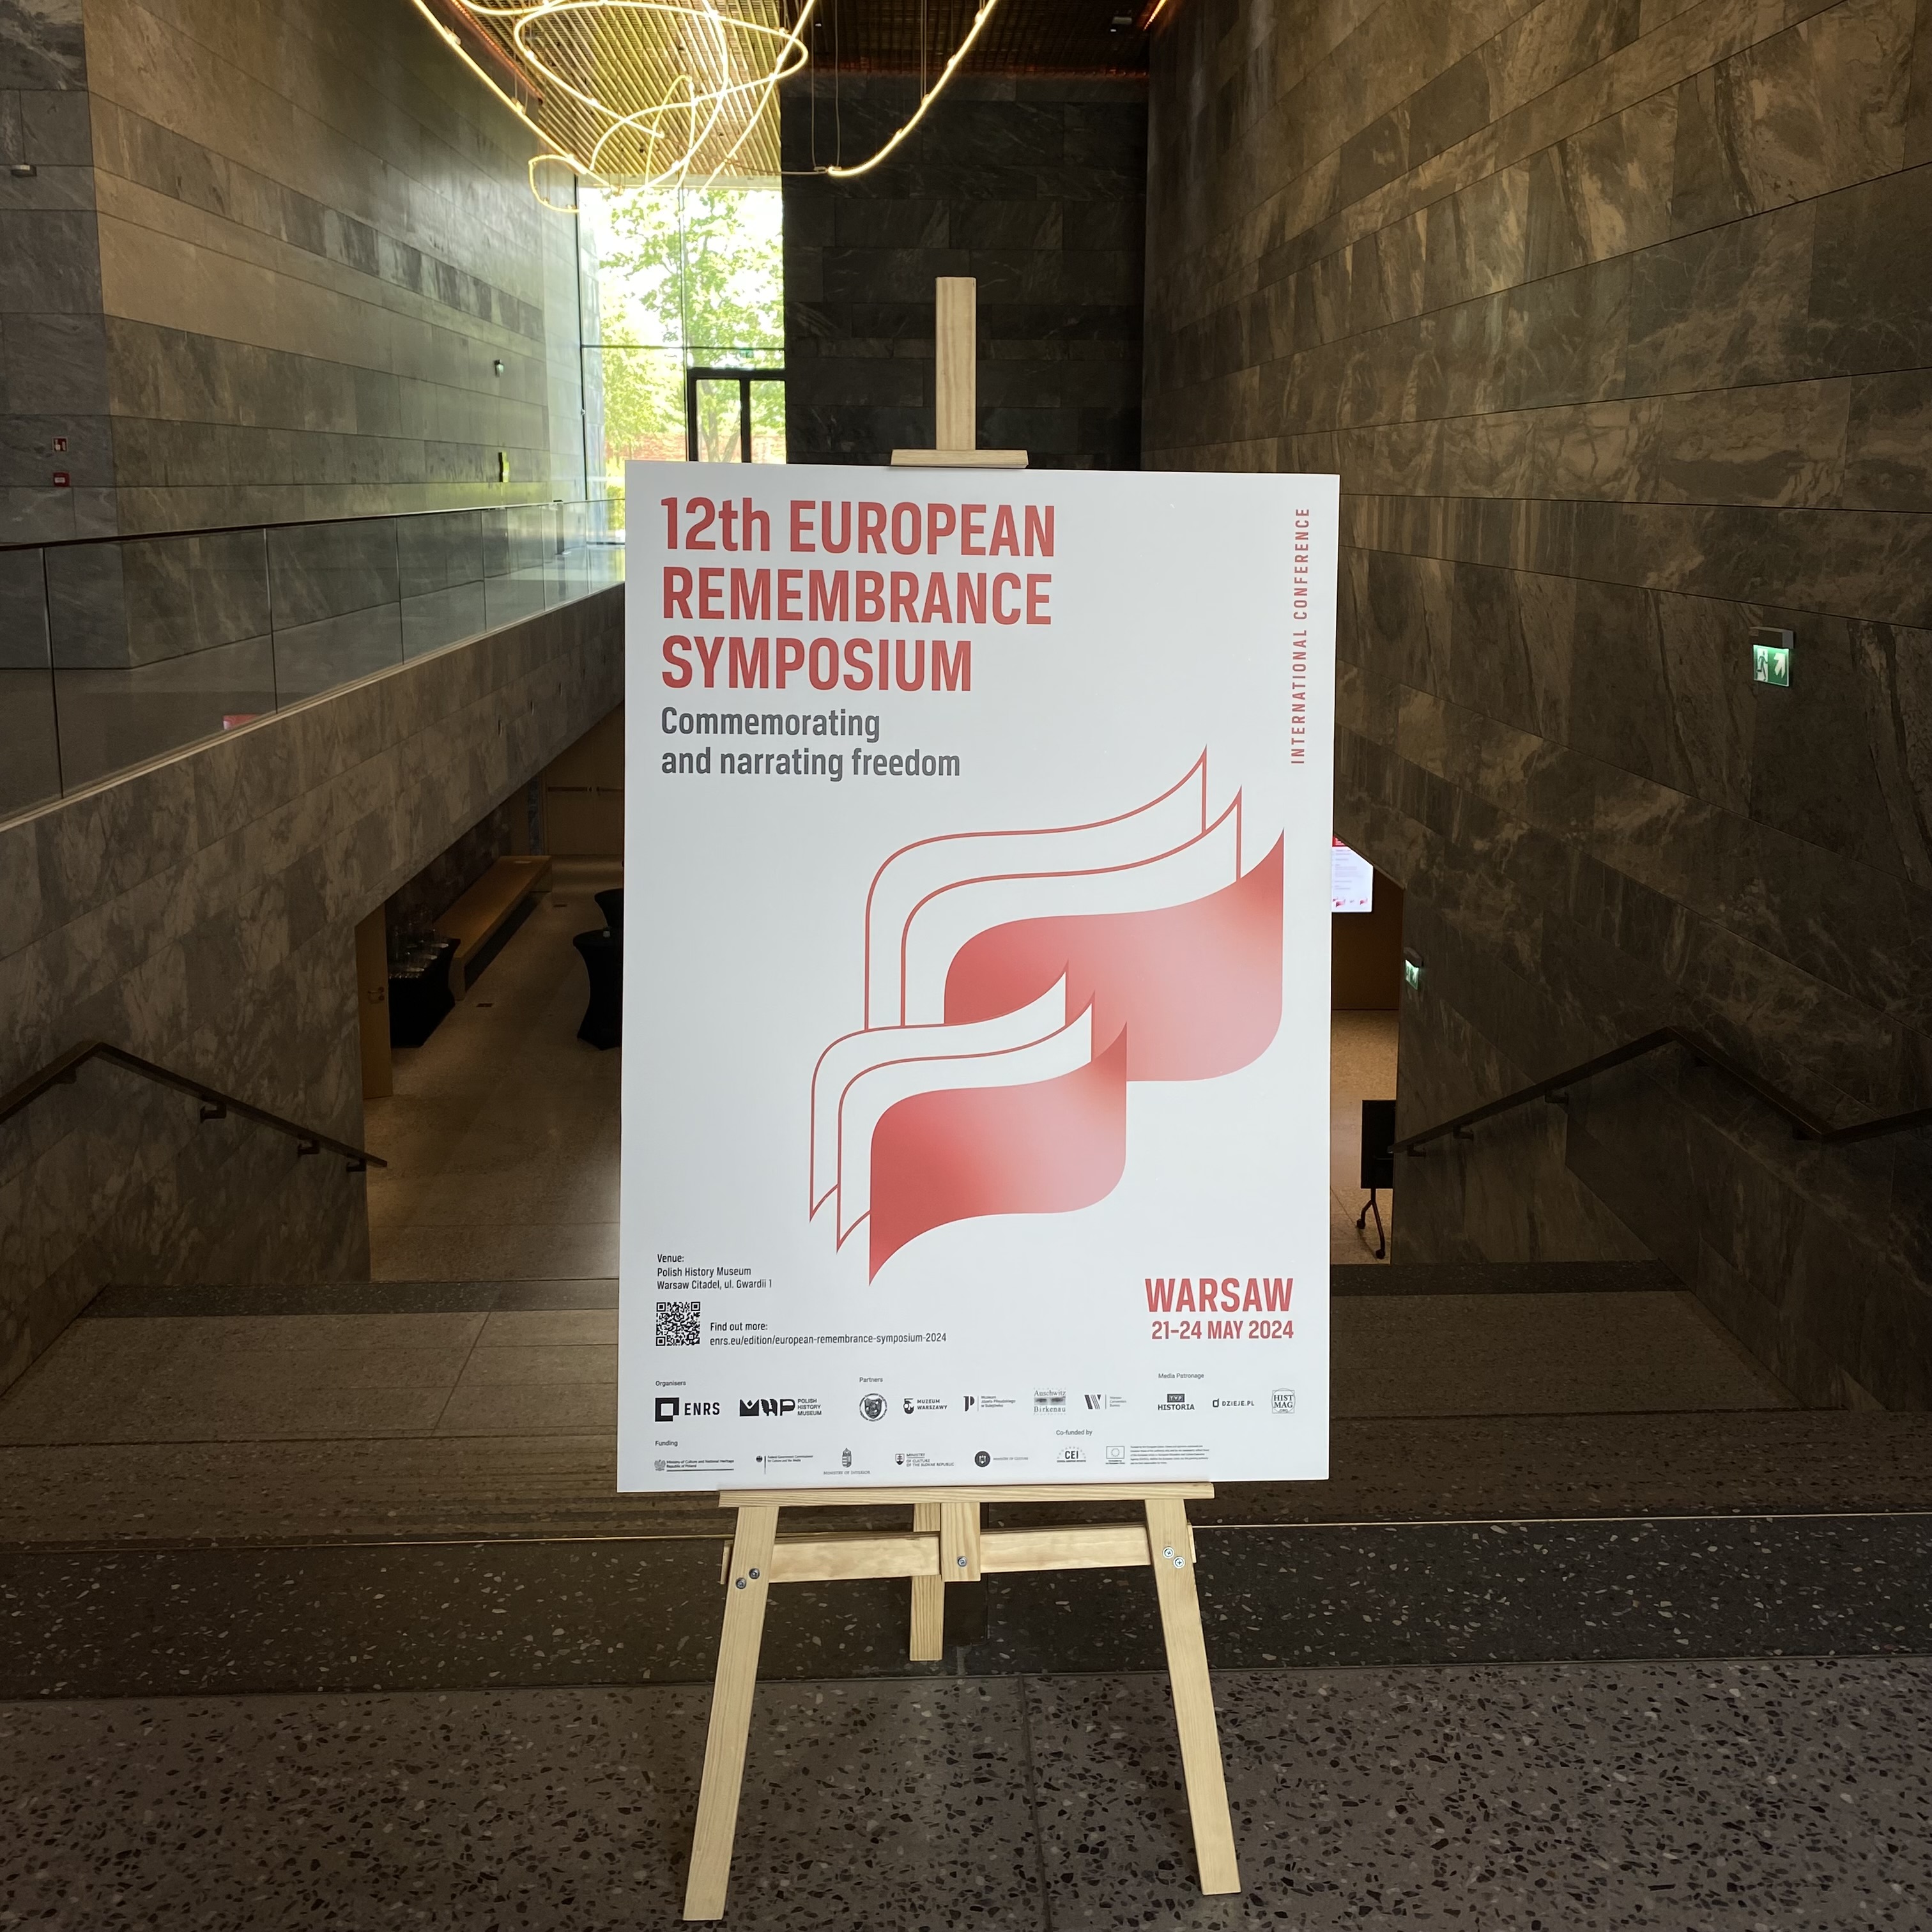 ’Freedom is not a thing of the past. Freedom is here and now’ – European Remembrance Symposium has ended in Warsaw